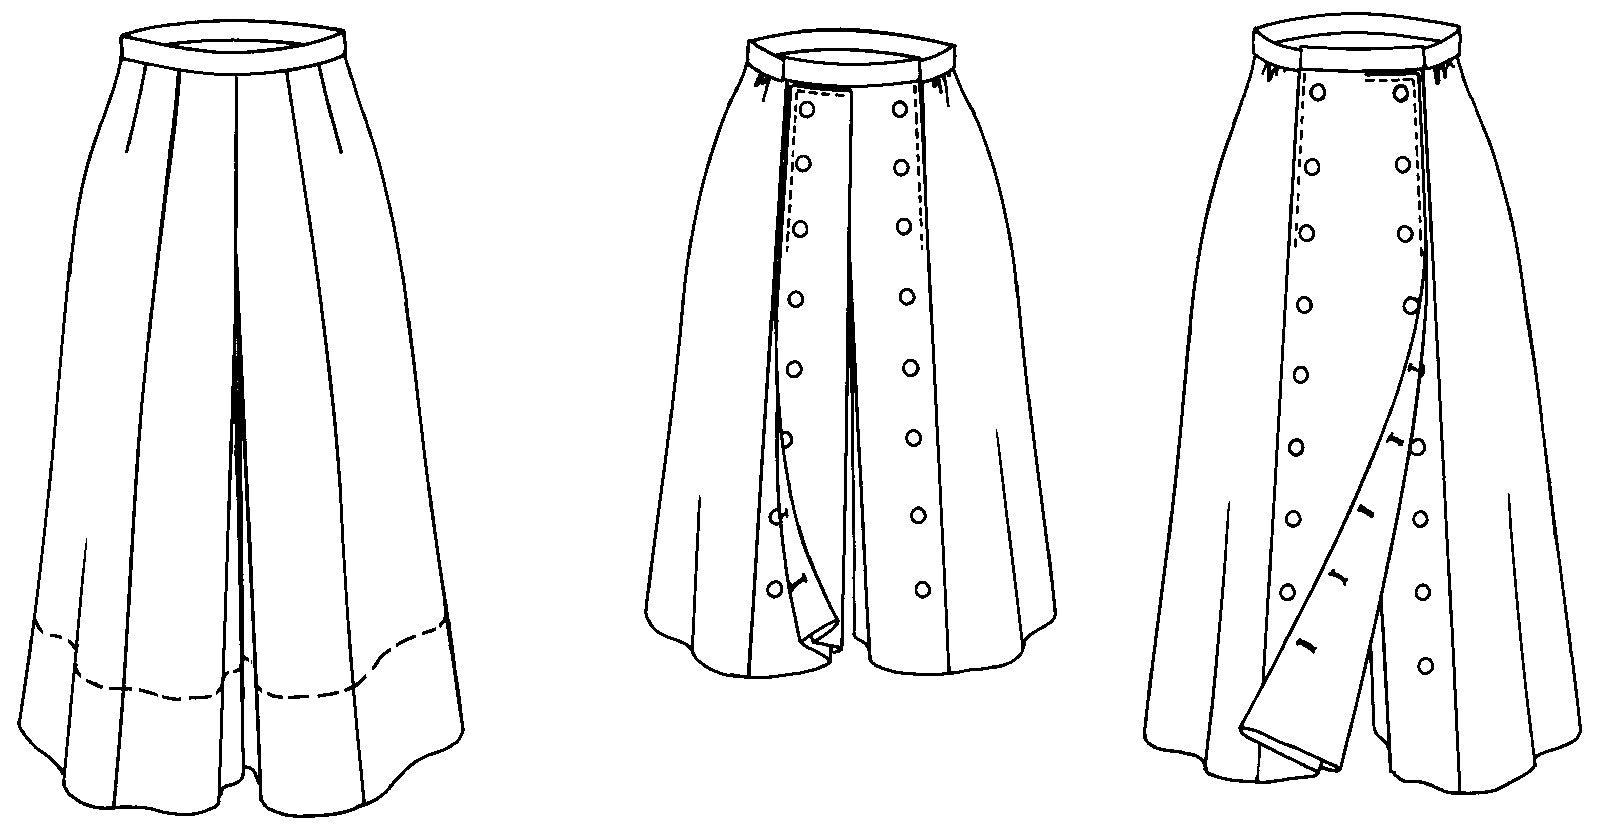 Black and white pattern drawing of back view of the skirt and front view of both versions of buttoning the skirt with the visual effect of pants and the visual effect of a skirt.